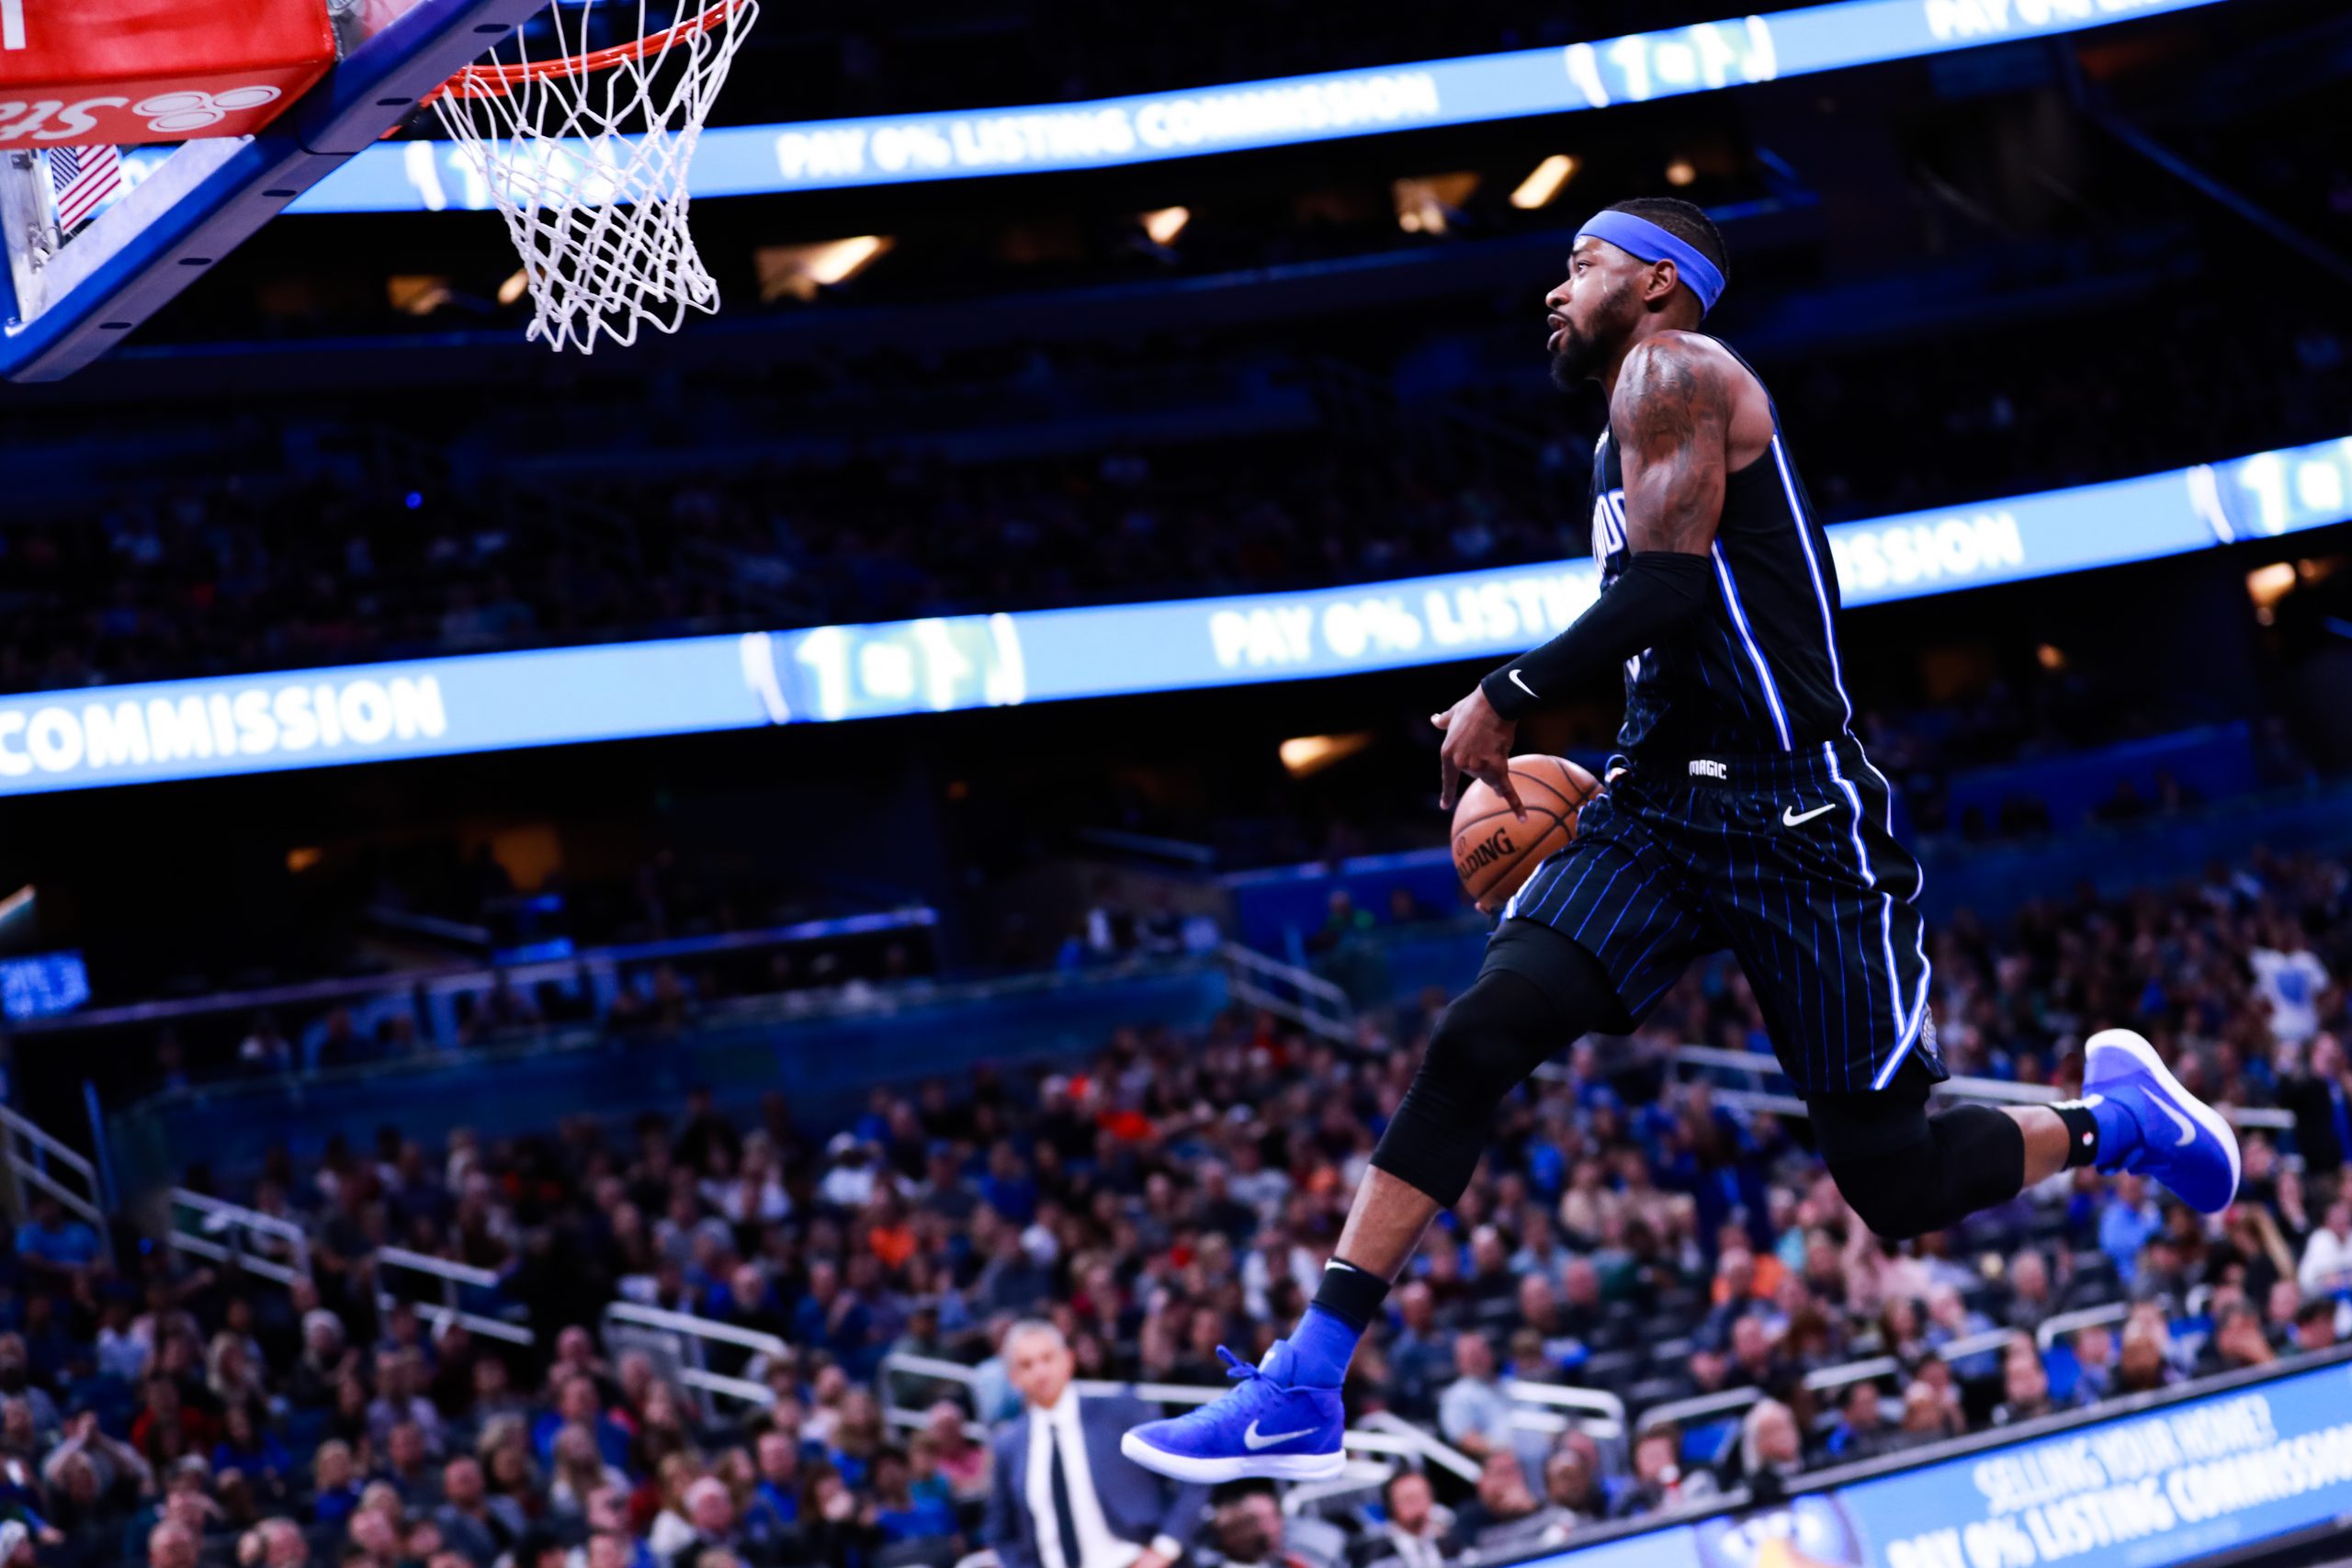 NBA Trade Deadline: The Orlando Magic Should Flip Terrence Ross or Gary Harris To Speed up Their Rebuild